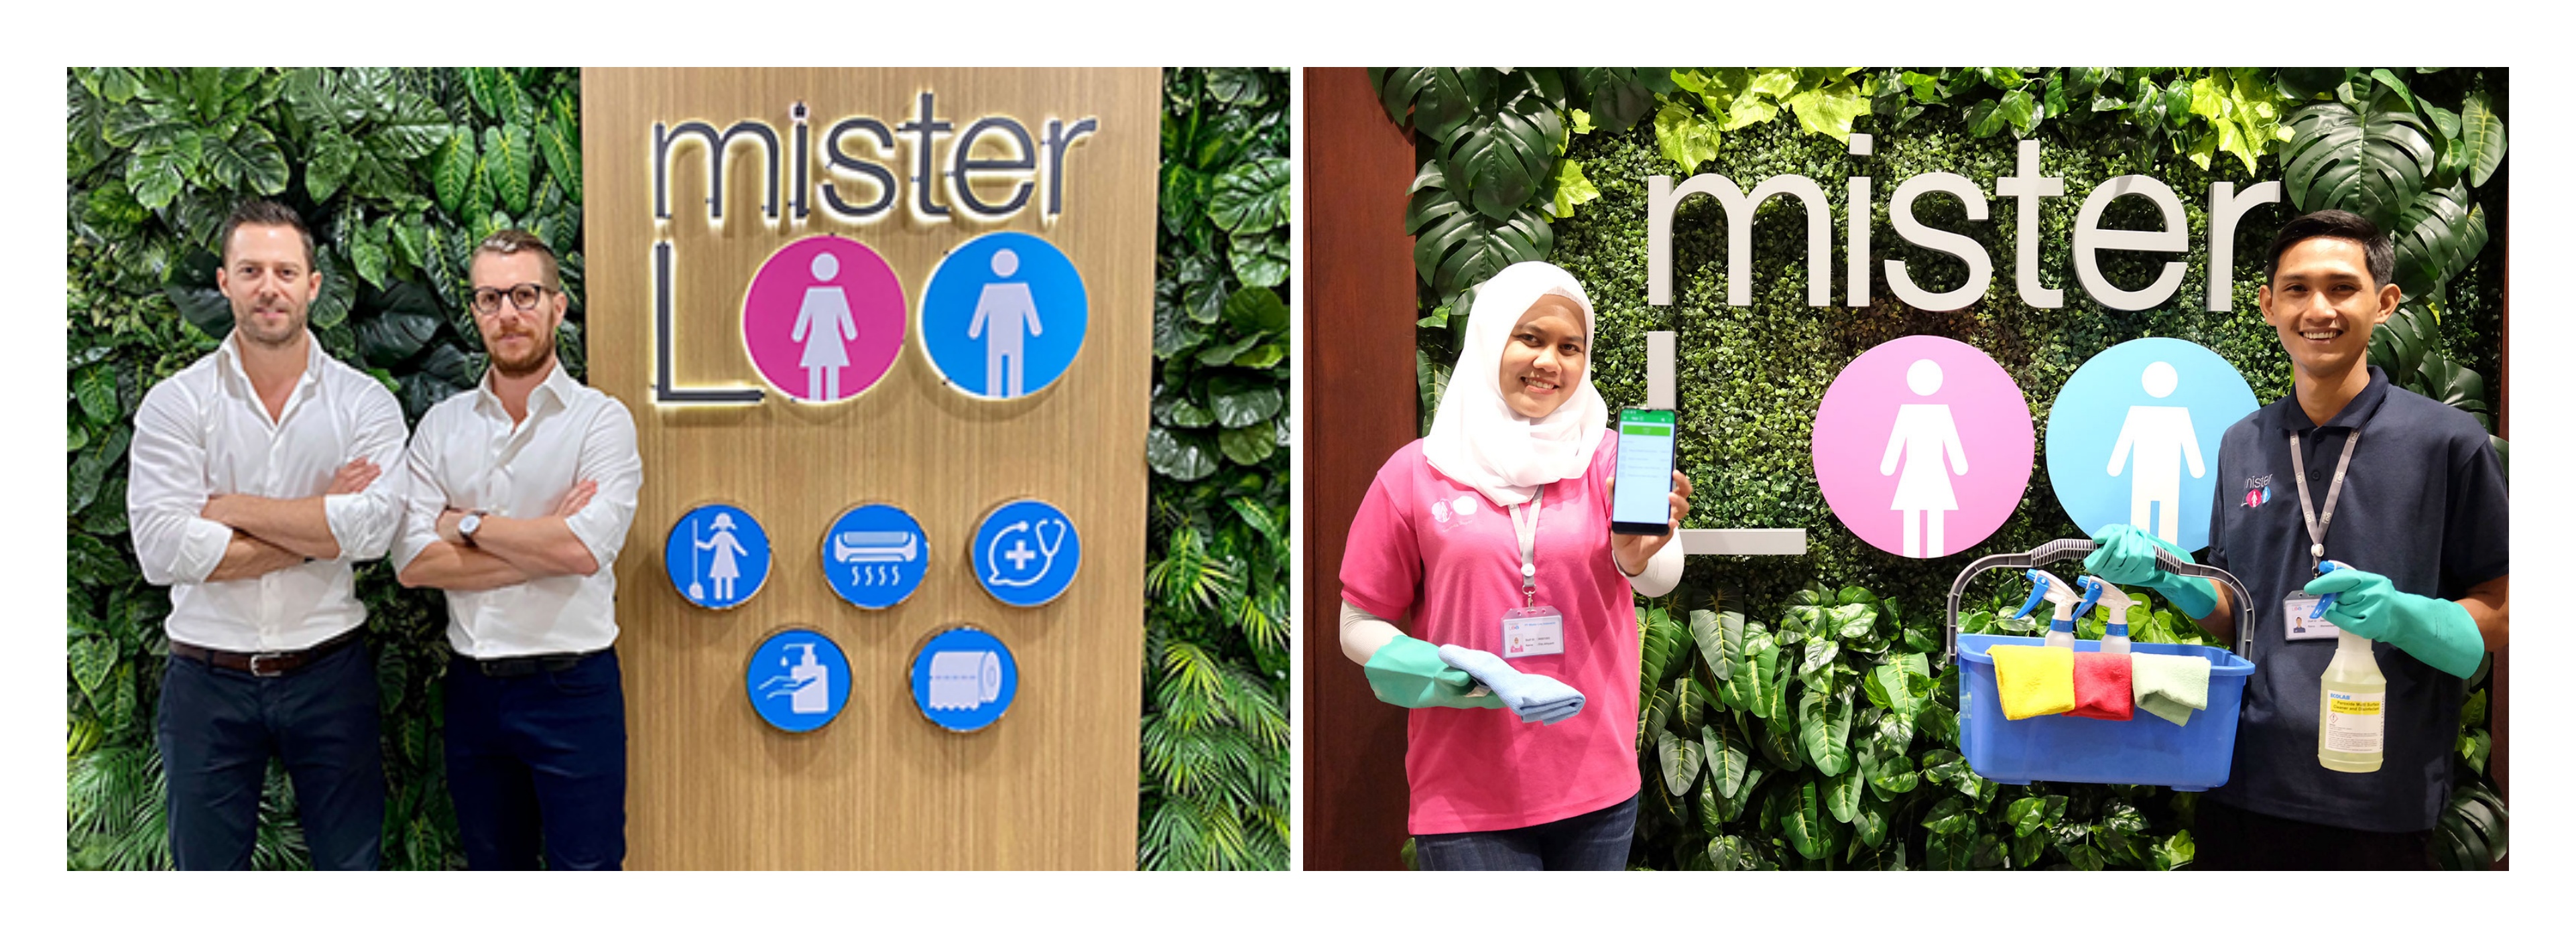 CHF 5M to expand Tech-enabled public toilet sanitation in emerging markets